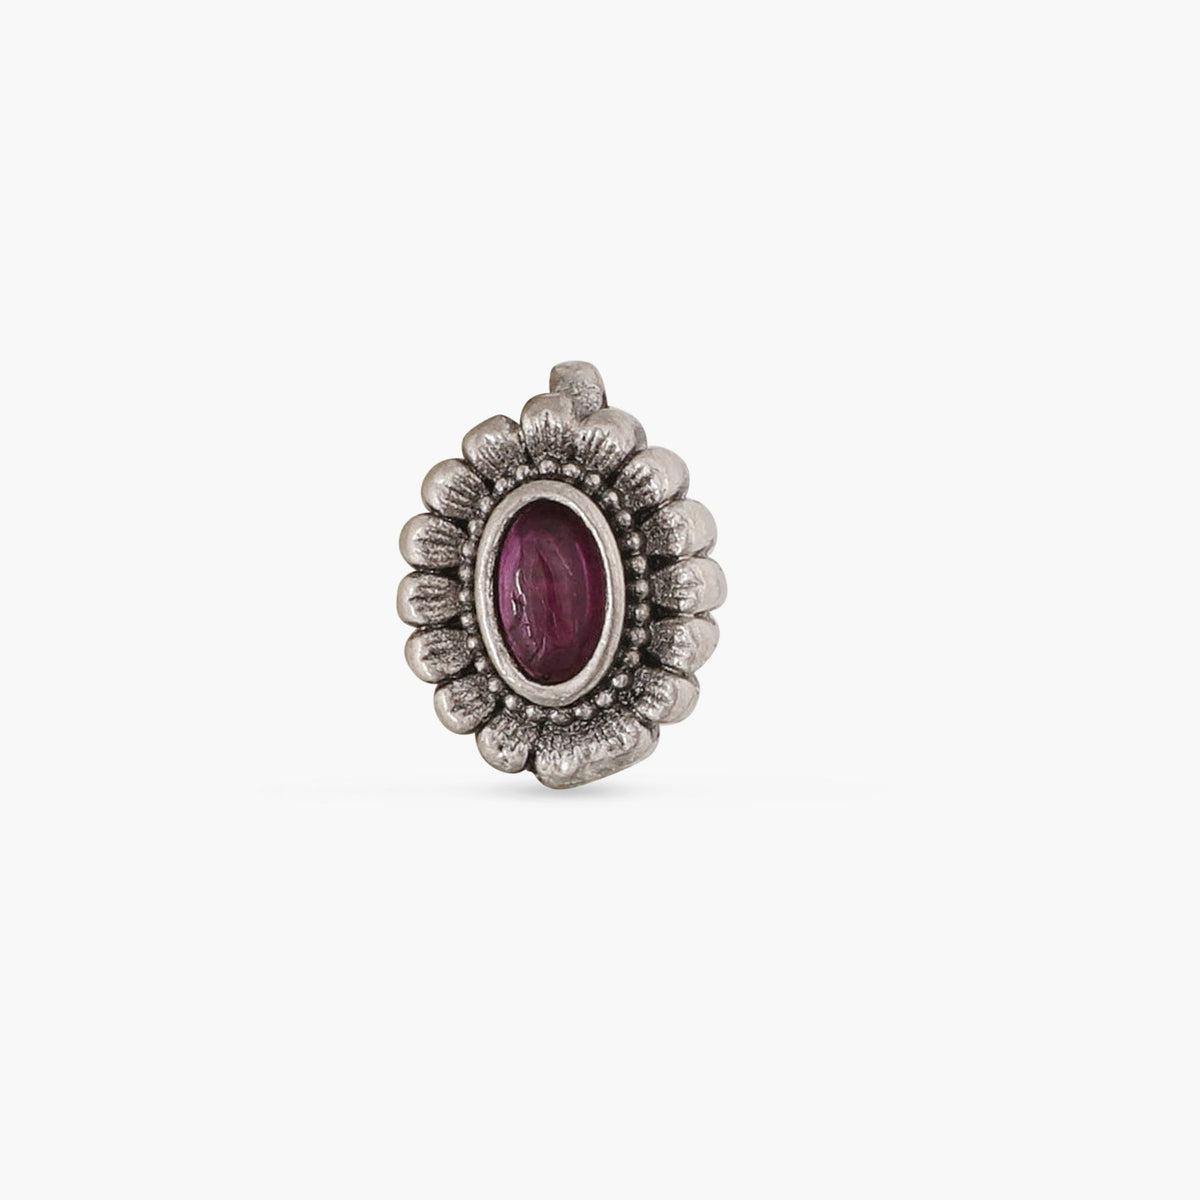 Maati Floral Antique Oxidized Nose Pin